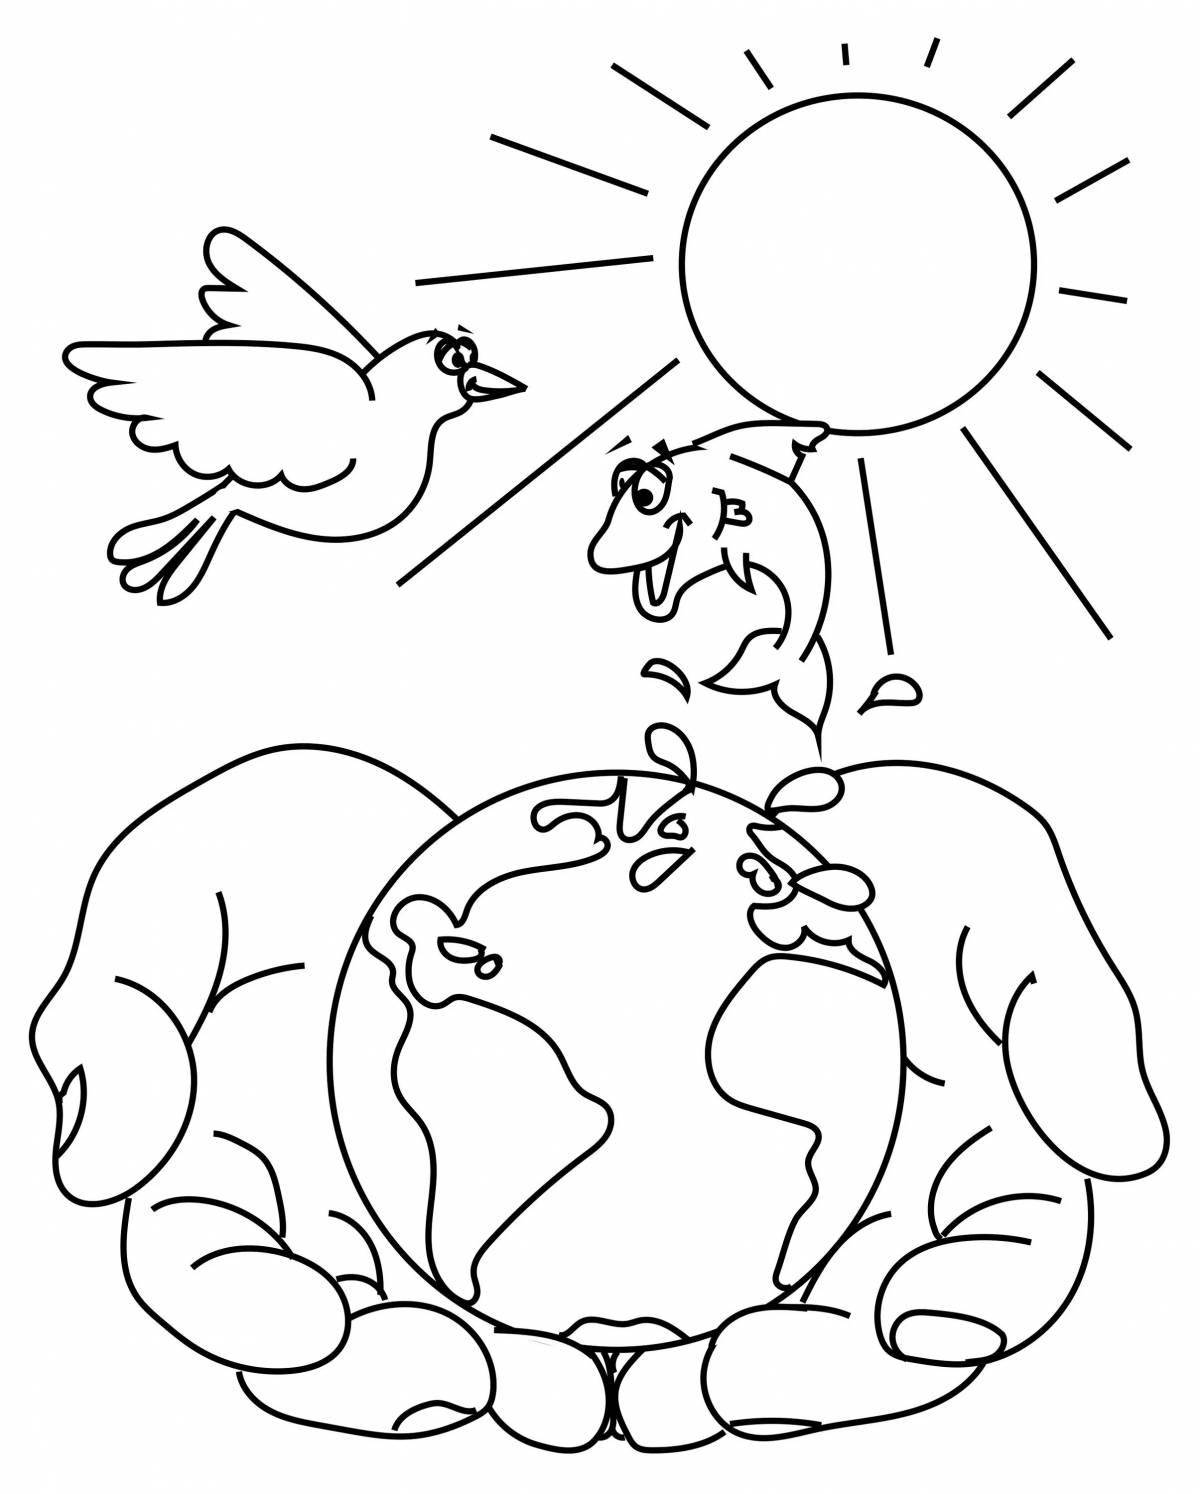 Take care of nature coloring page